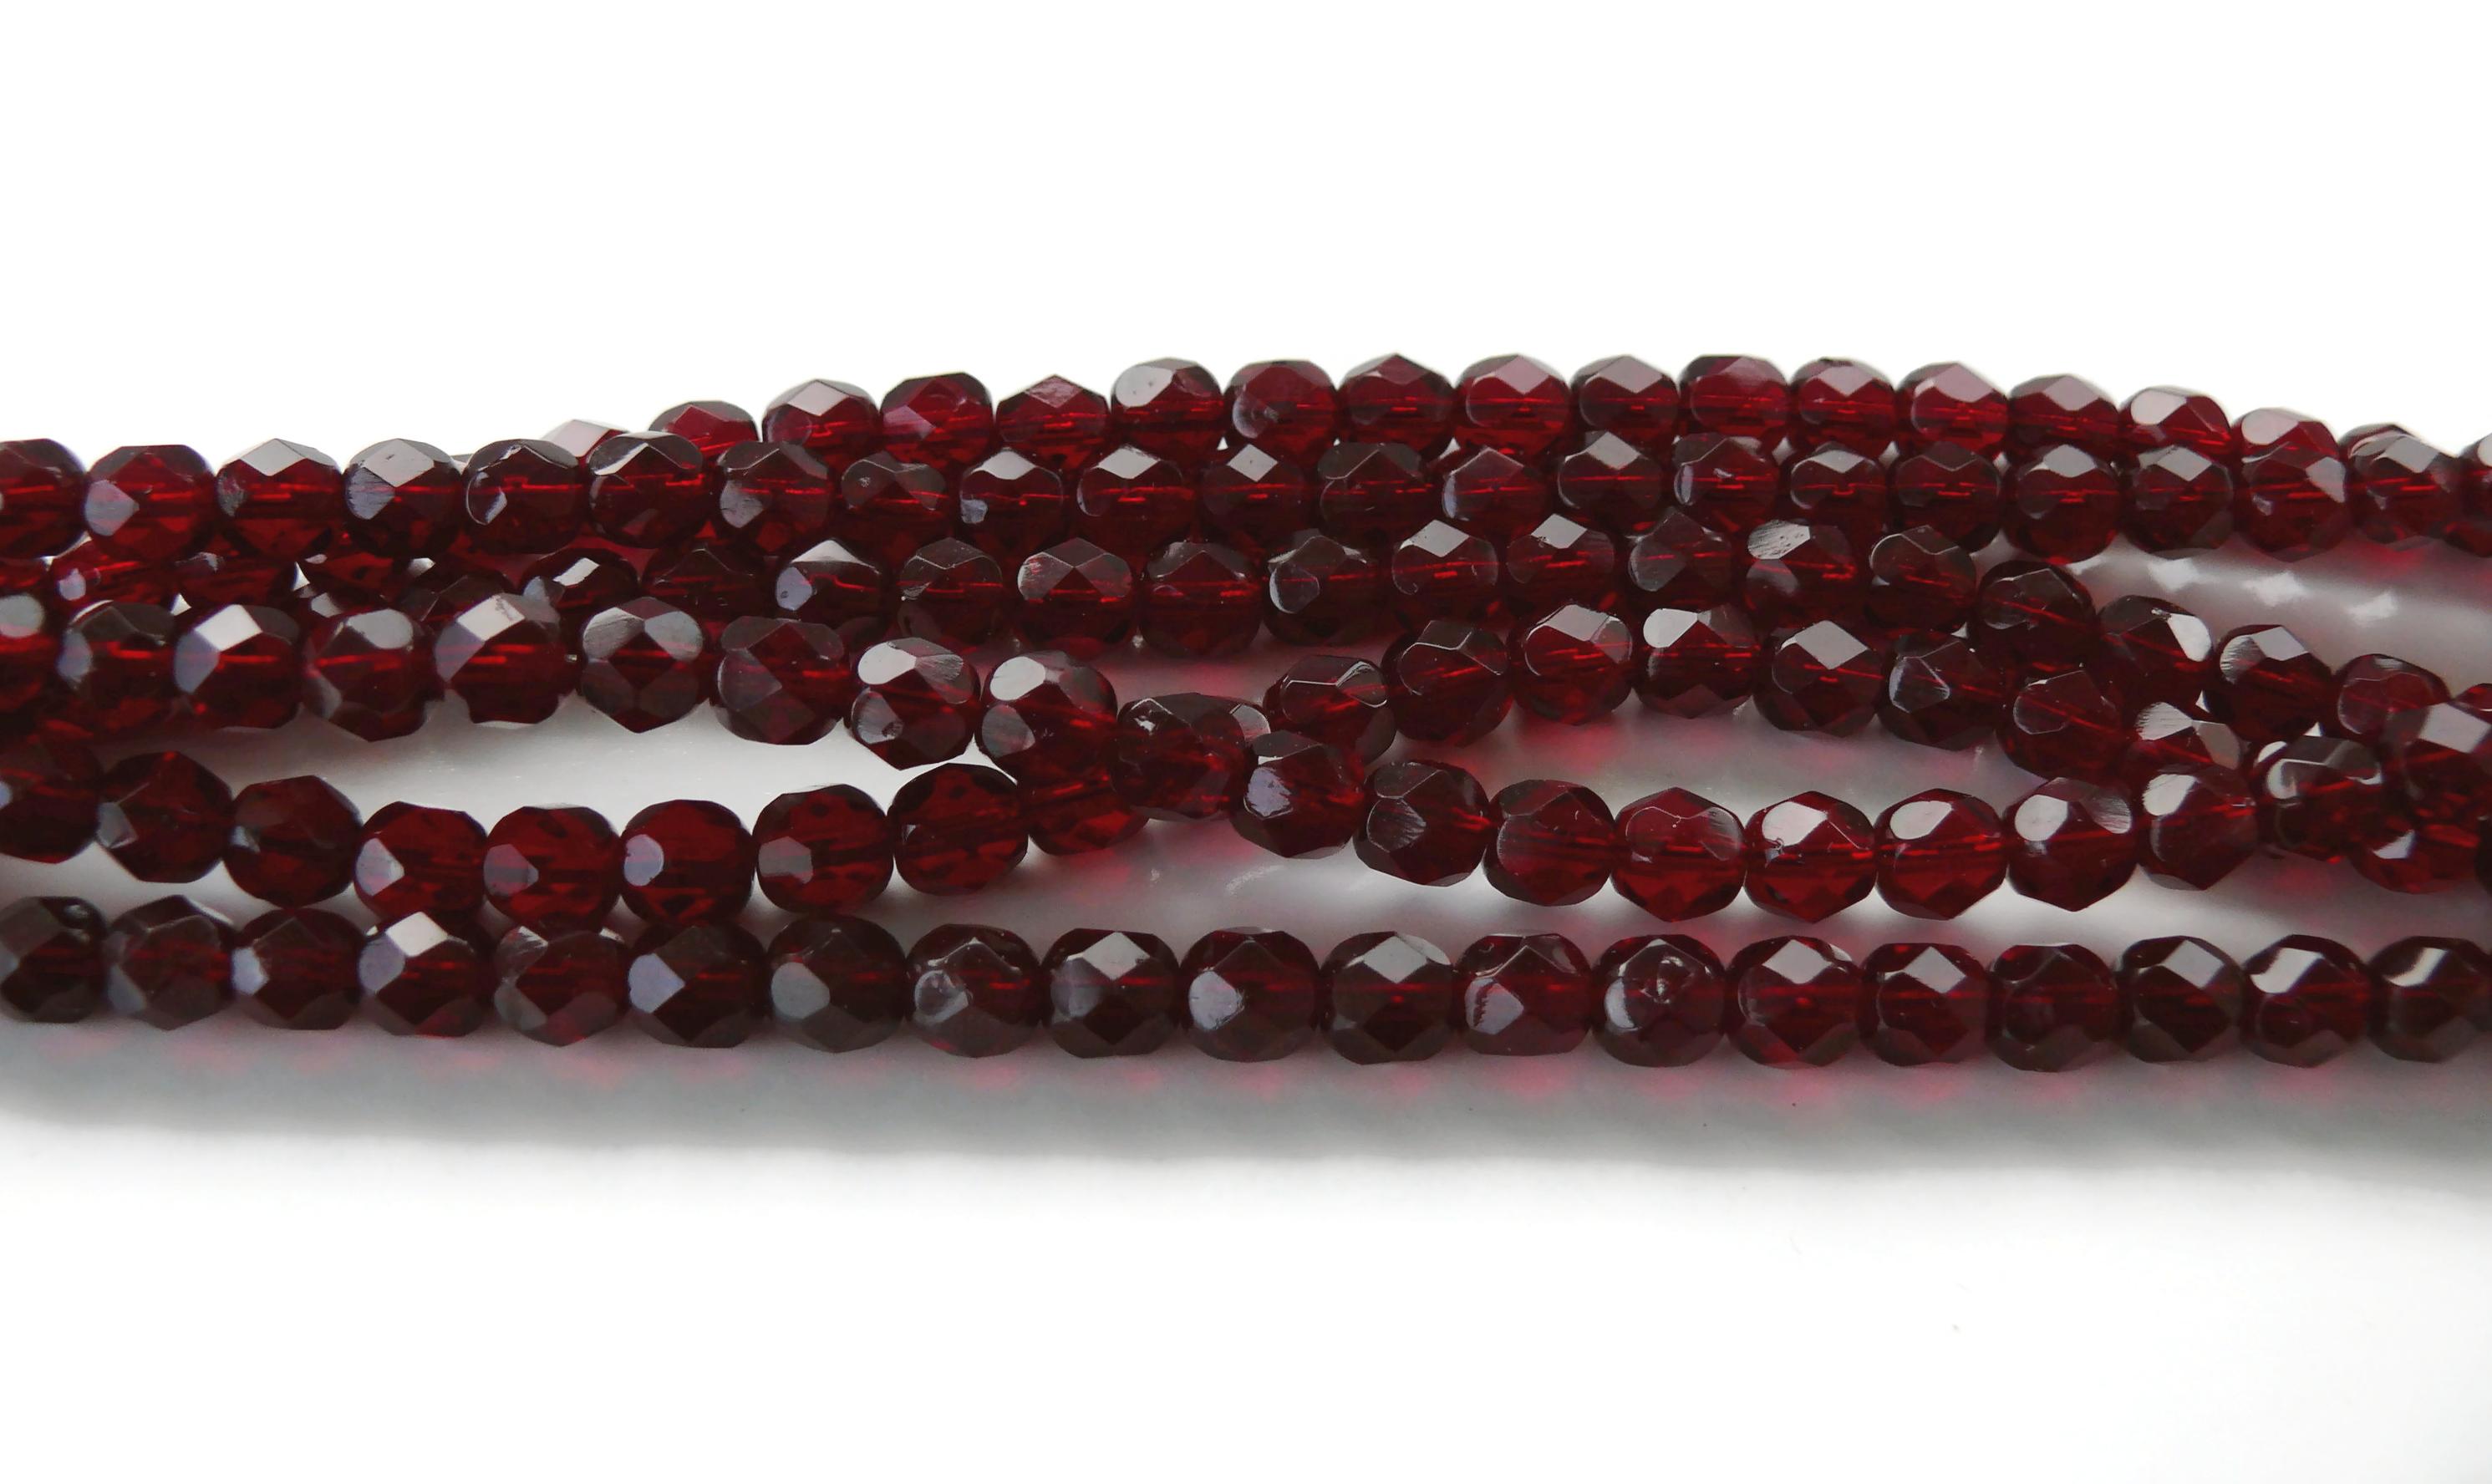 Christian Dior Hypnotic Poison Promotional Multi Strand Garnet Beads Bracelet In Good Condition For Sale In Nice, FR